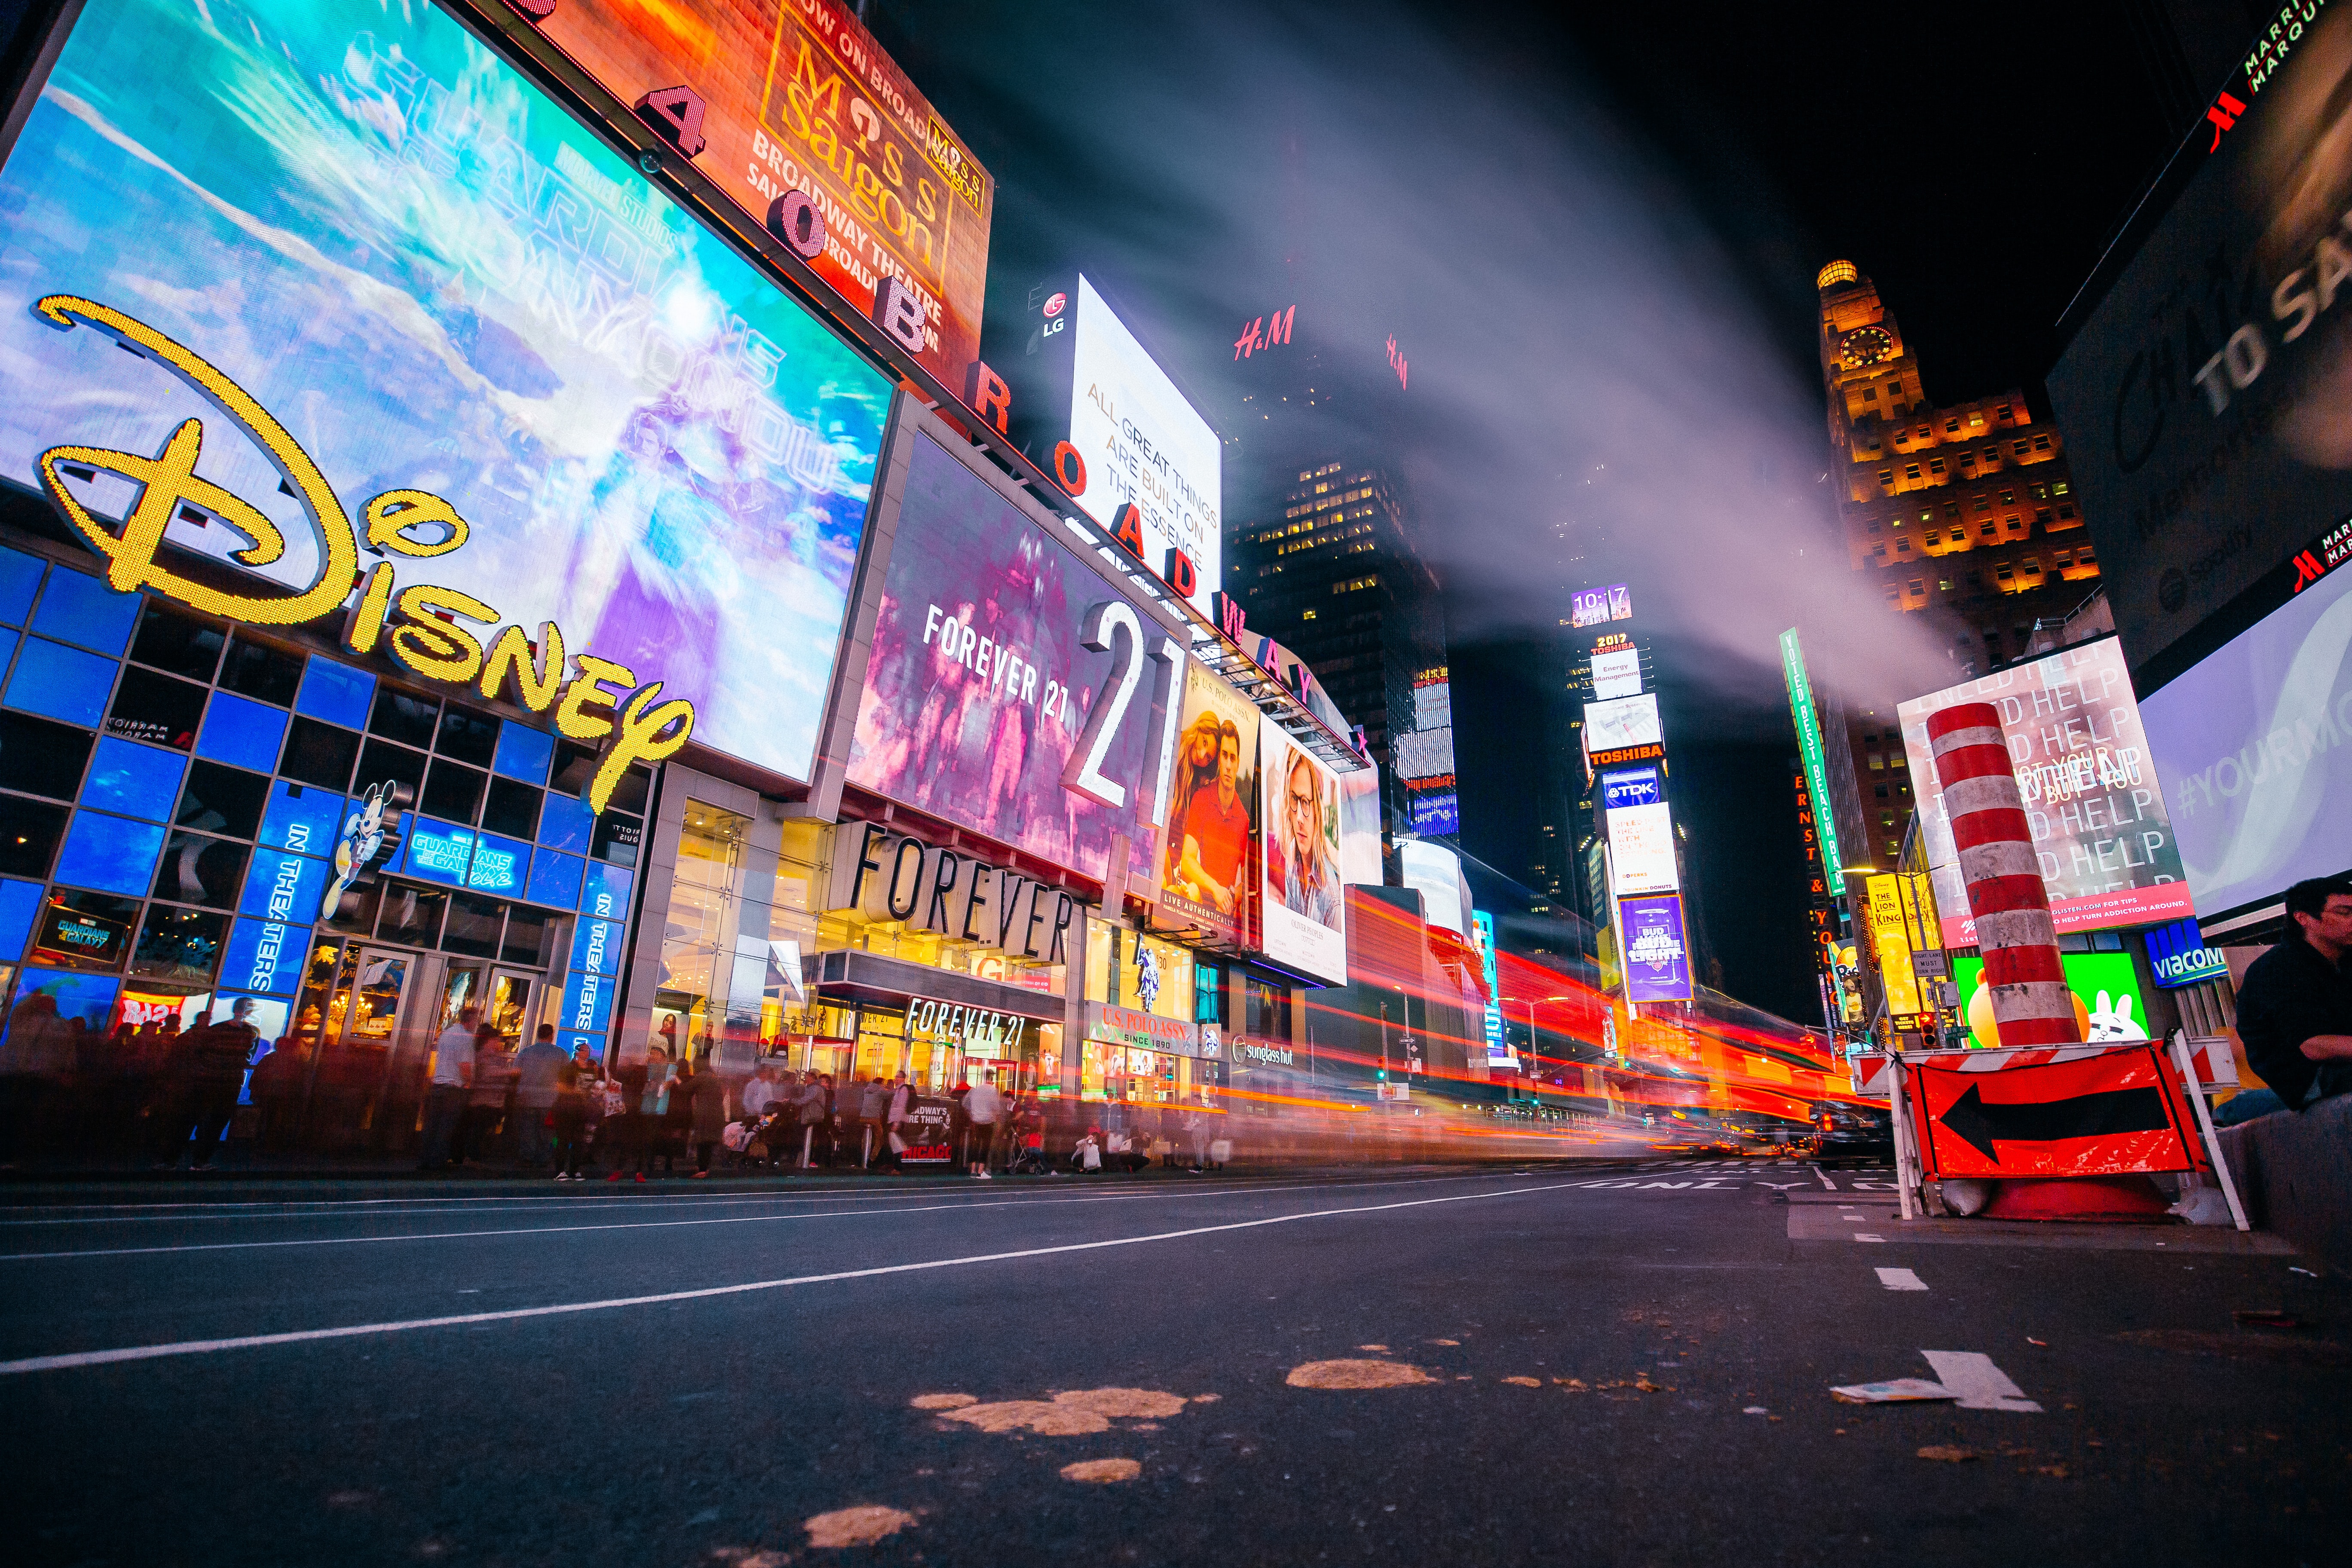 Are LED Screens The Next Step in Digital Display Technology?